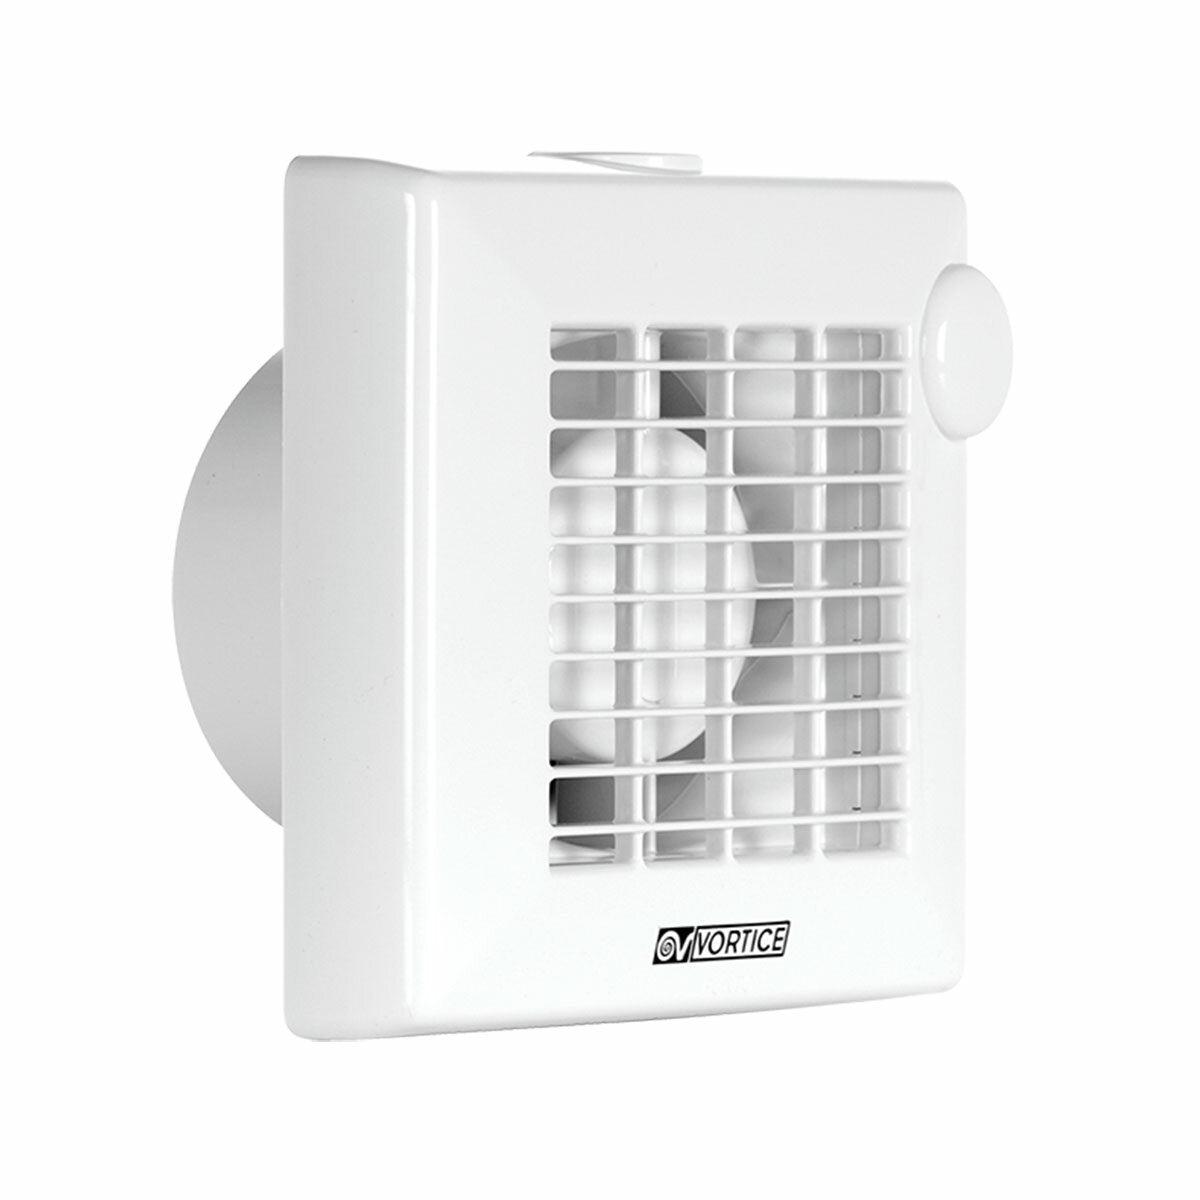 Vortice M 100/4" wall-mounted extractor